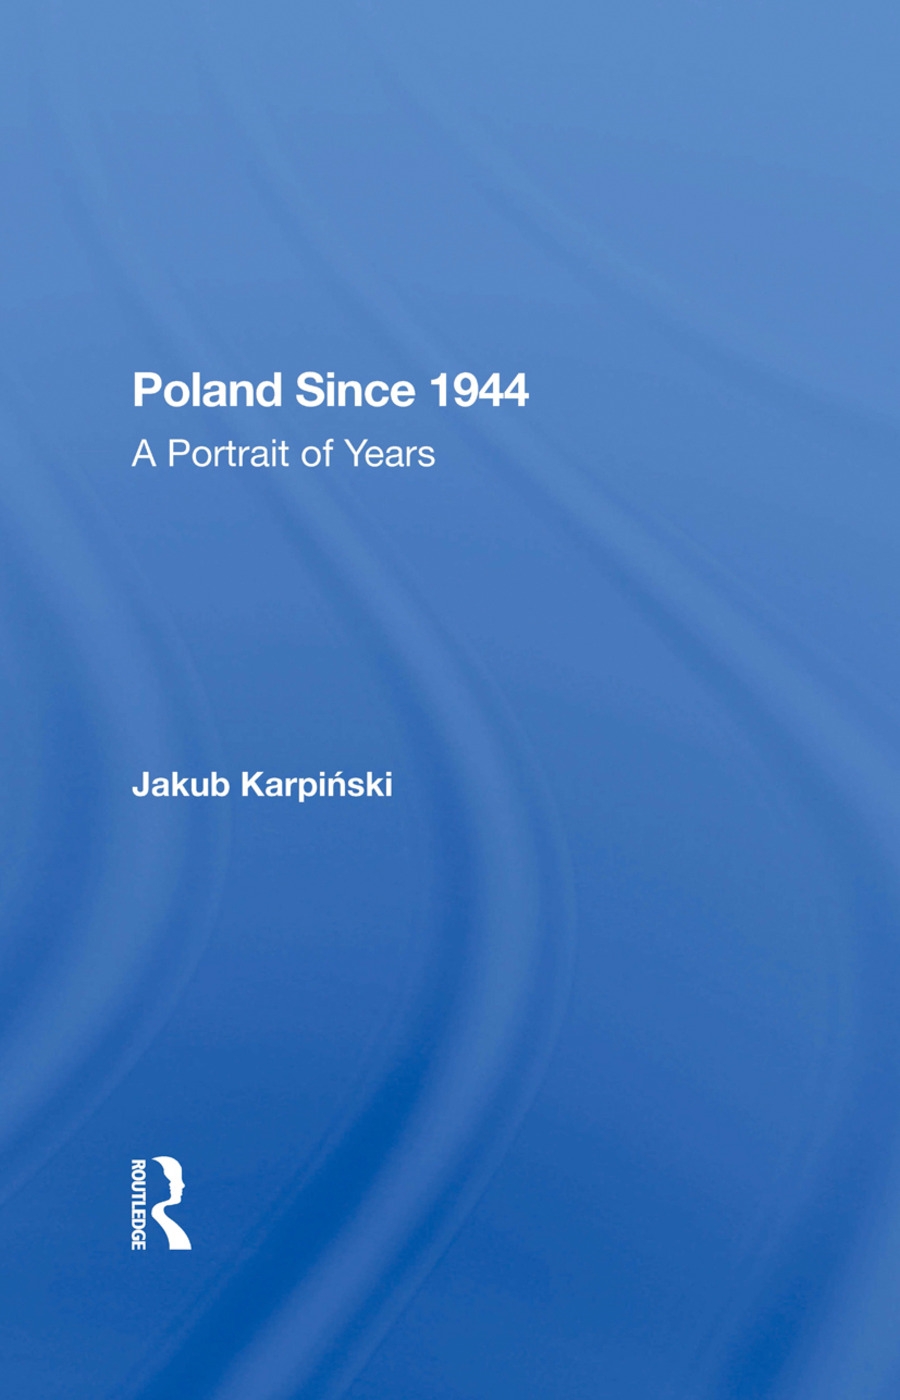 Poland Since 1944: A Portrait of Years